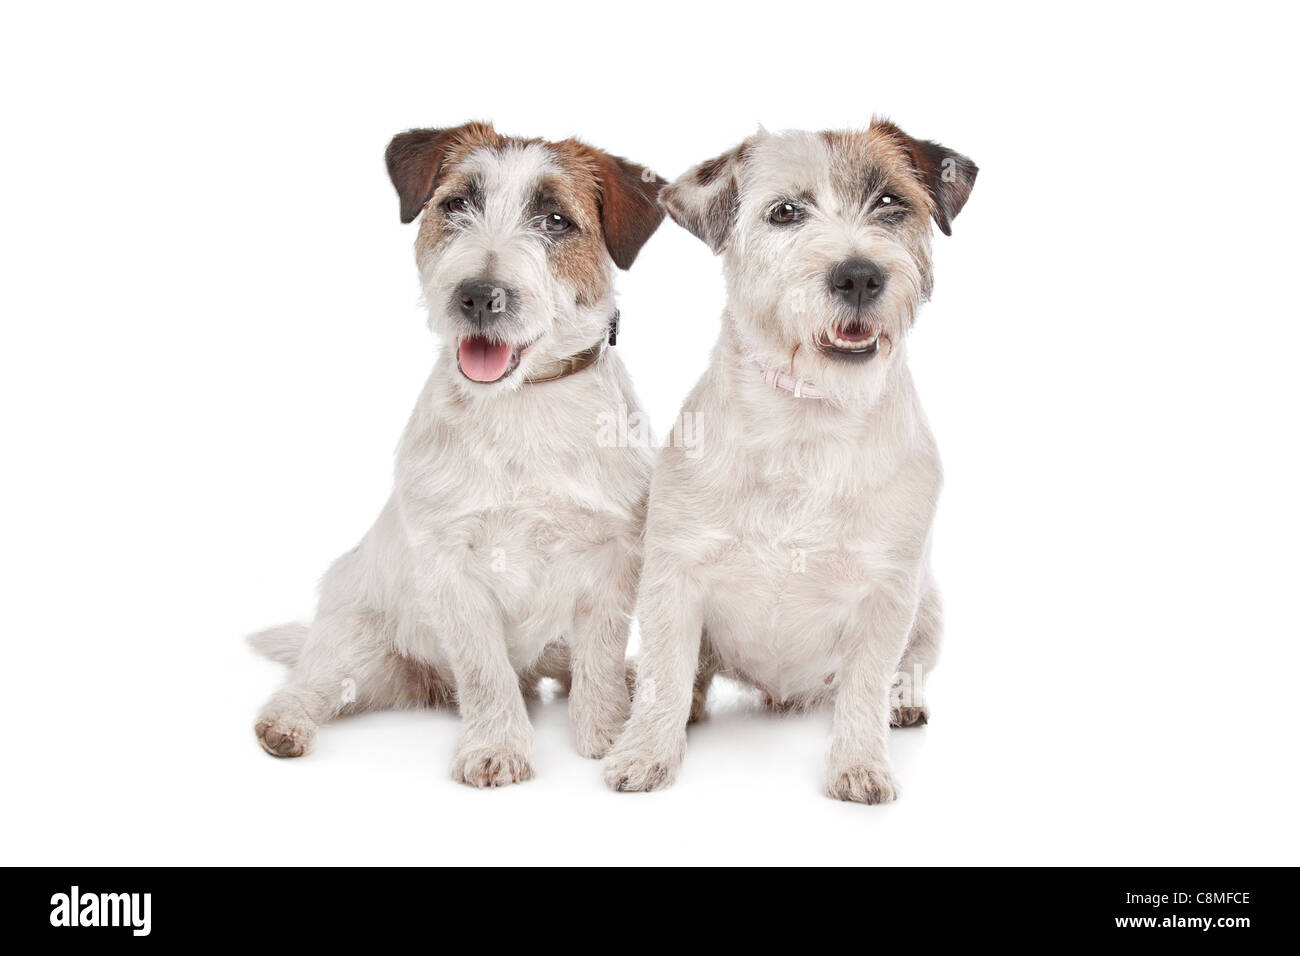 Jack Russel Terrier in front of a white background Stock Photo